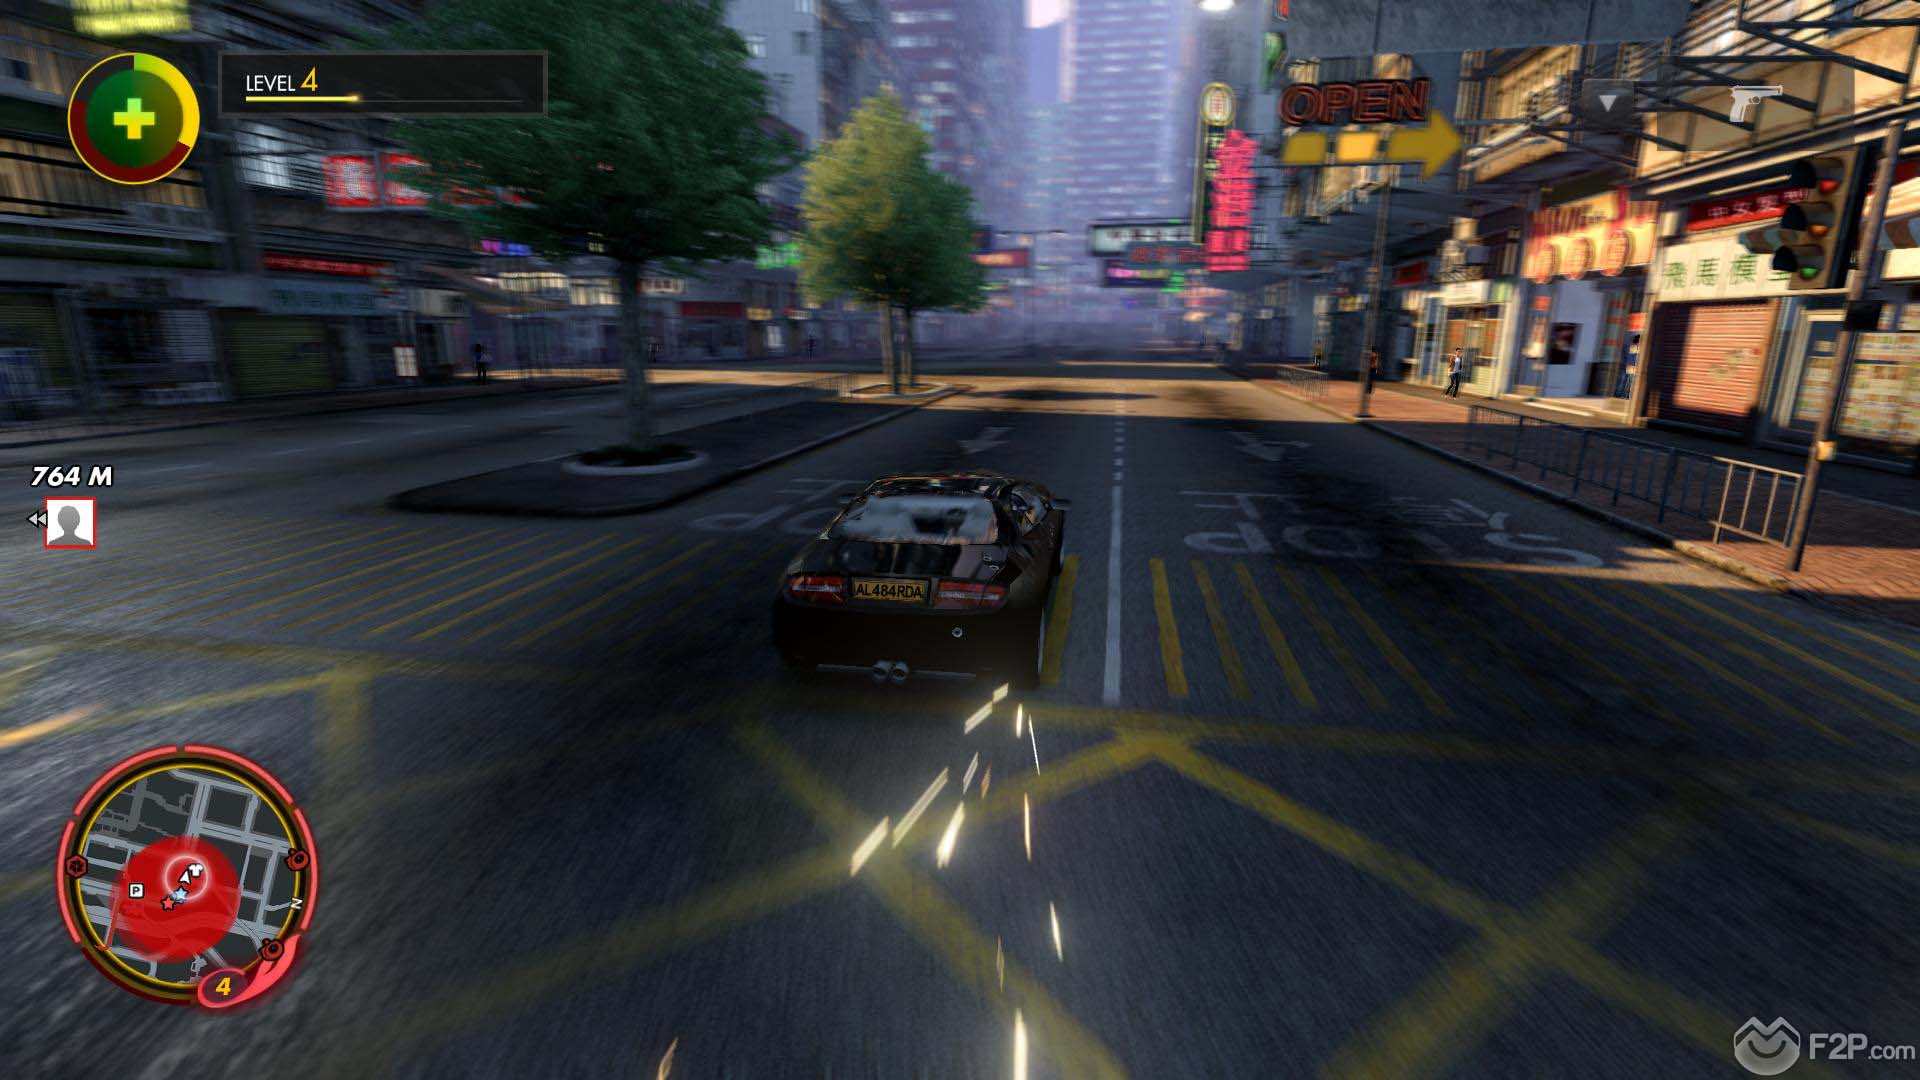 Triad Wars - Sleeping Dogs Free-To-Play Expansion - Gets Gorgeous  Screenshots